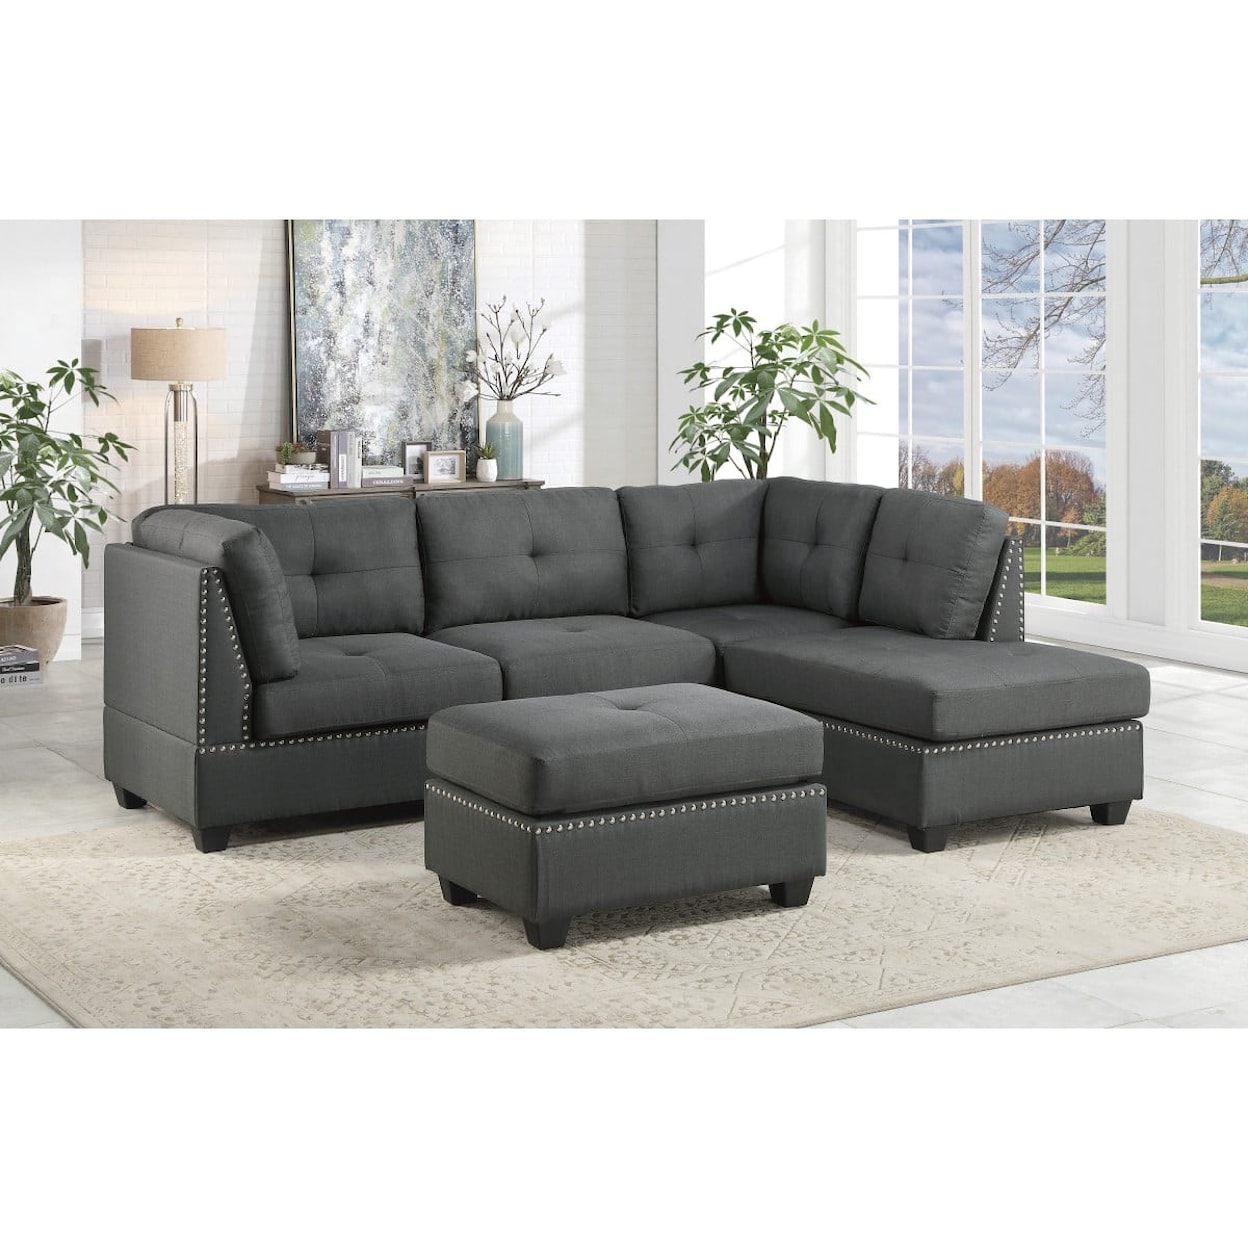 Homelegance Dasha 2-Piece Sectional with Right Chaise